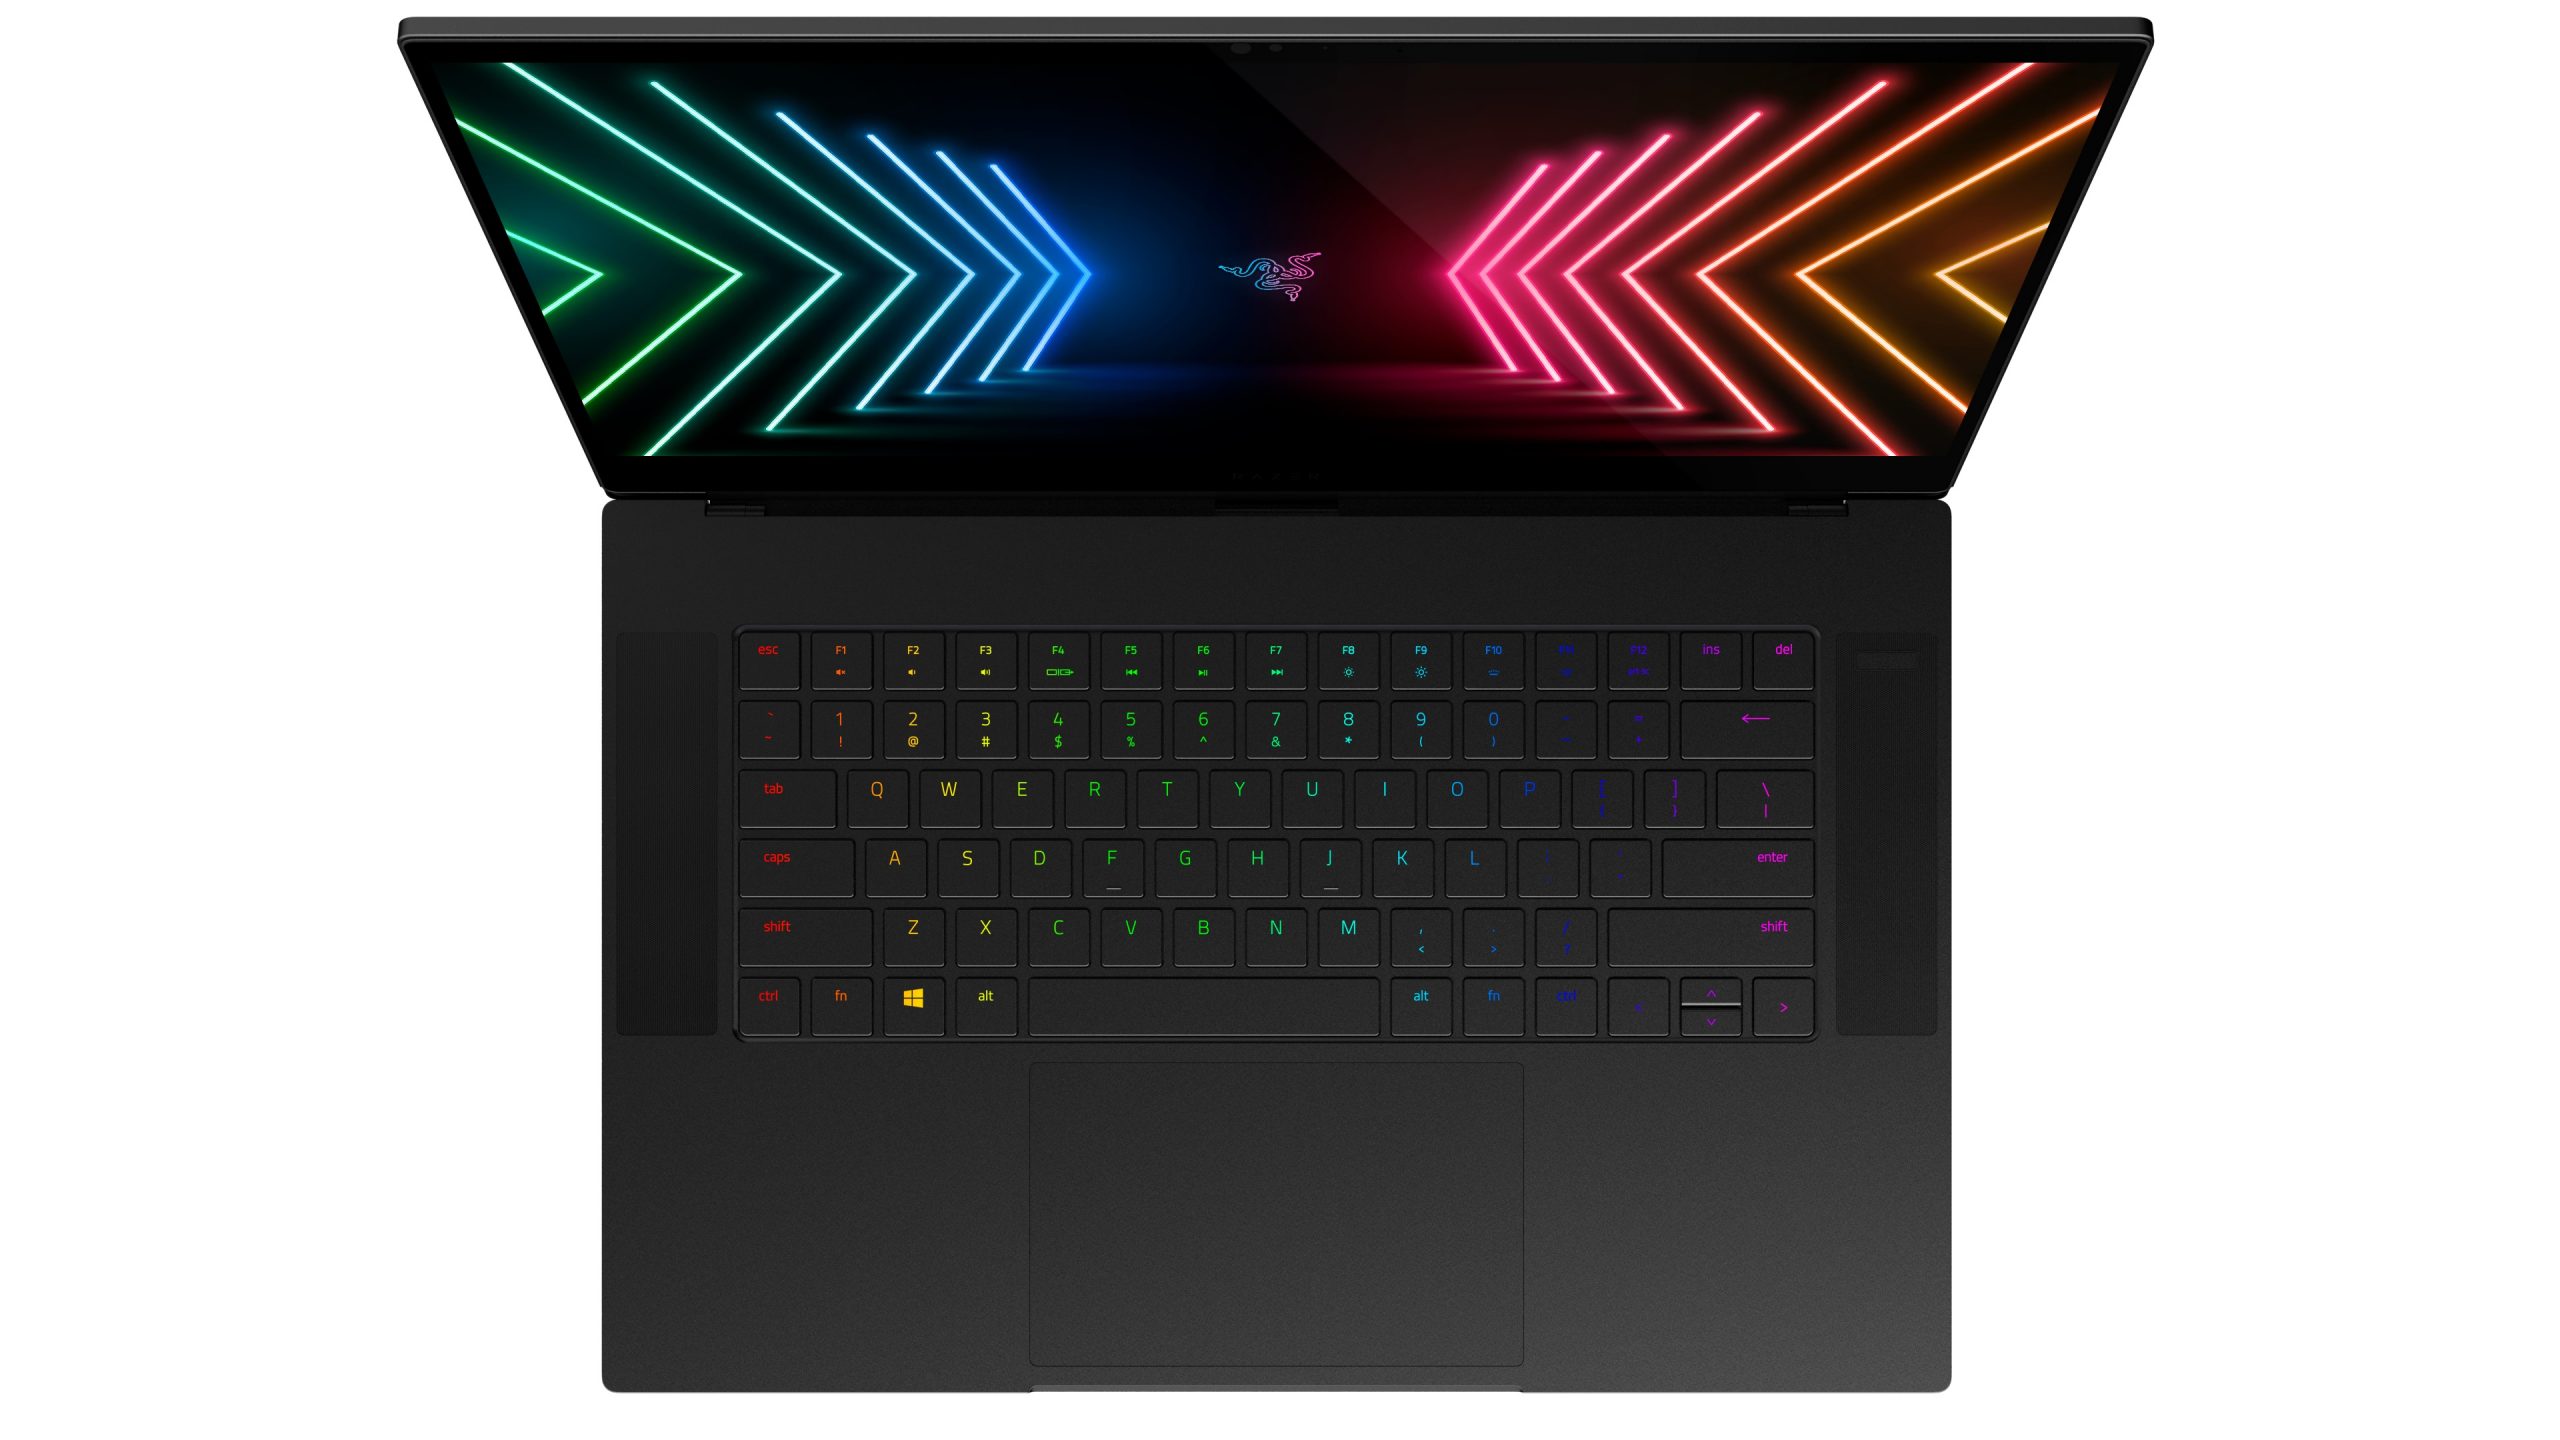 New Razer Blade 15 Advanced Model ready to help level up your gaming